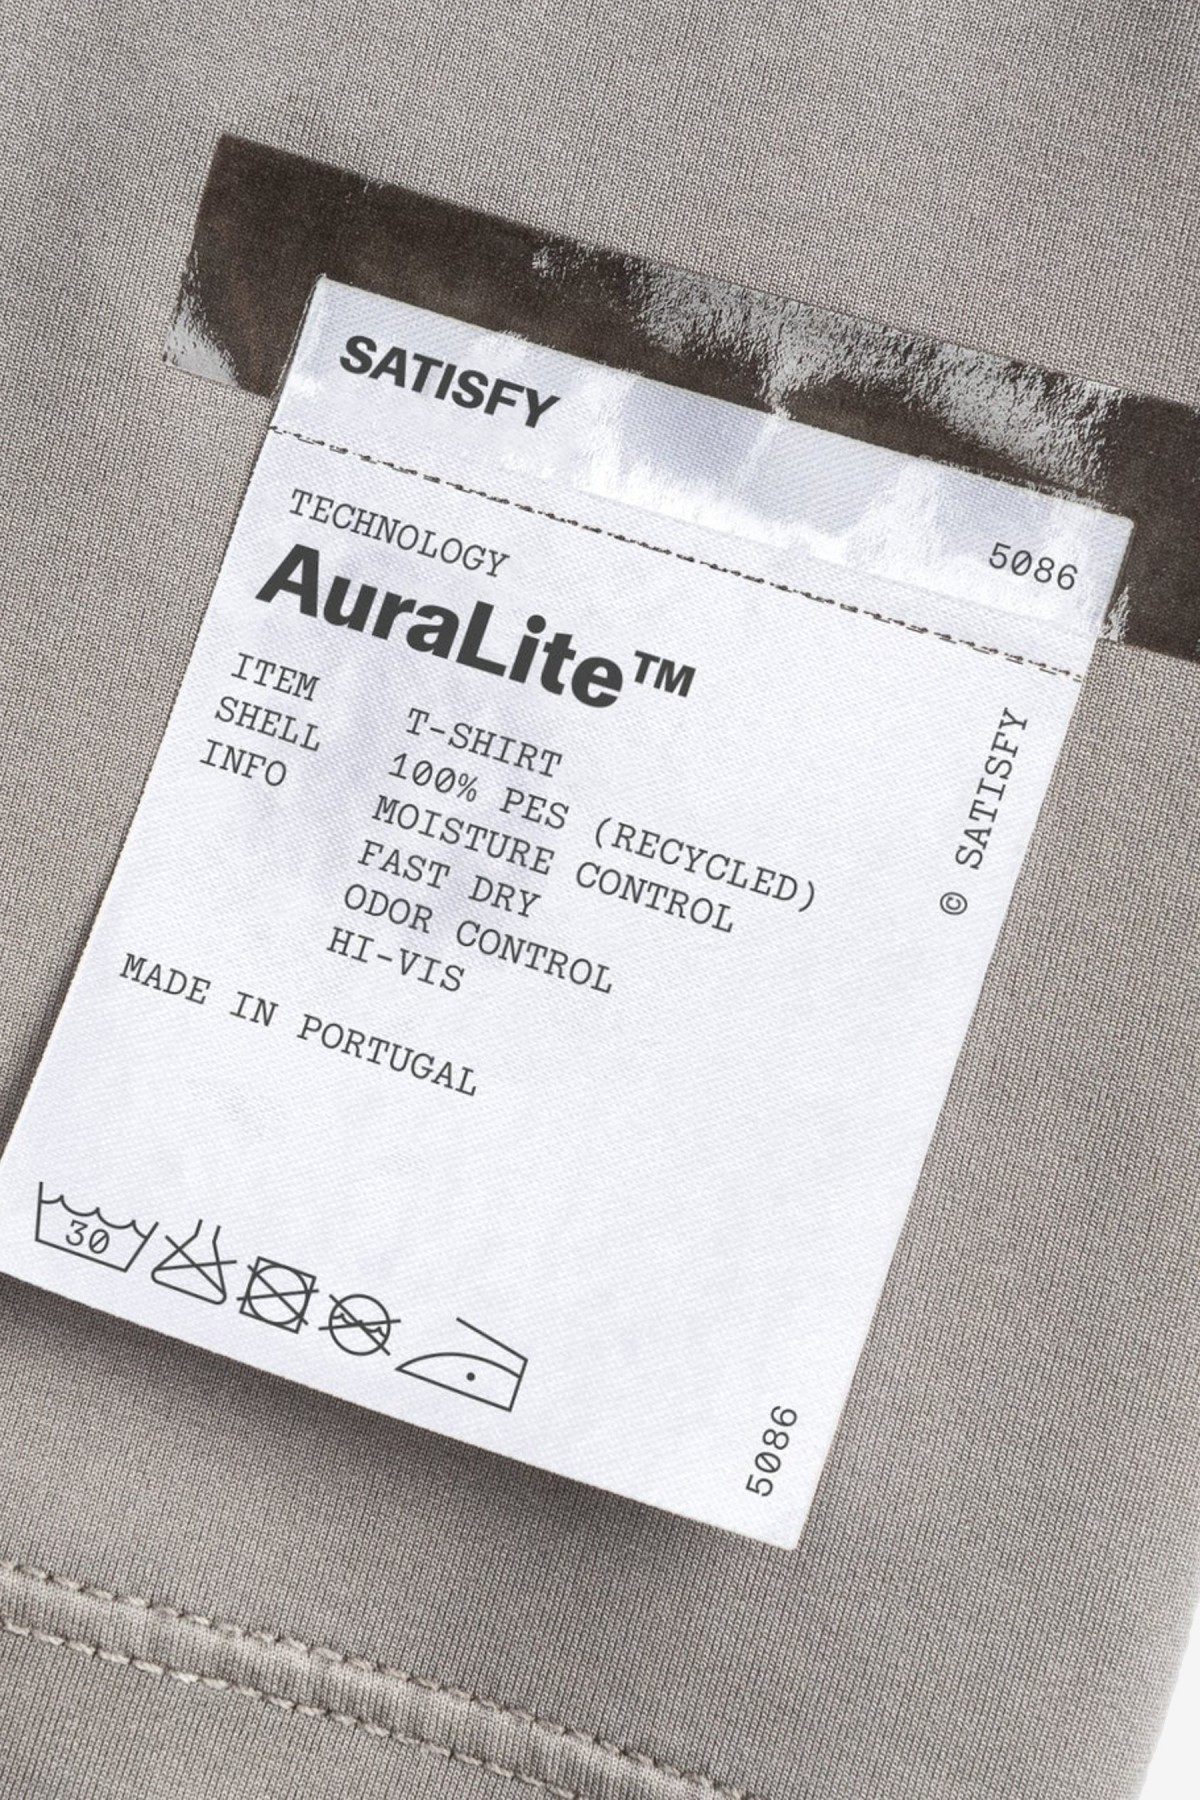 Satisfy Running AuraLite T-Shirt in Mineral Fossil